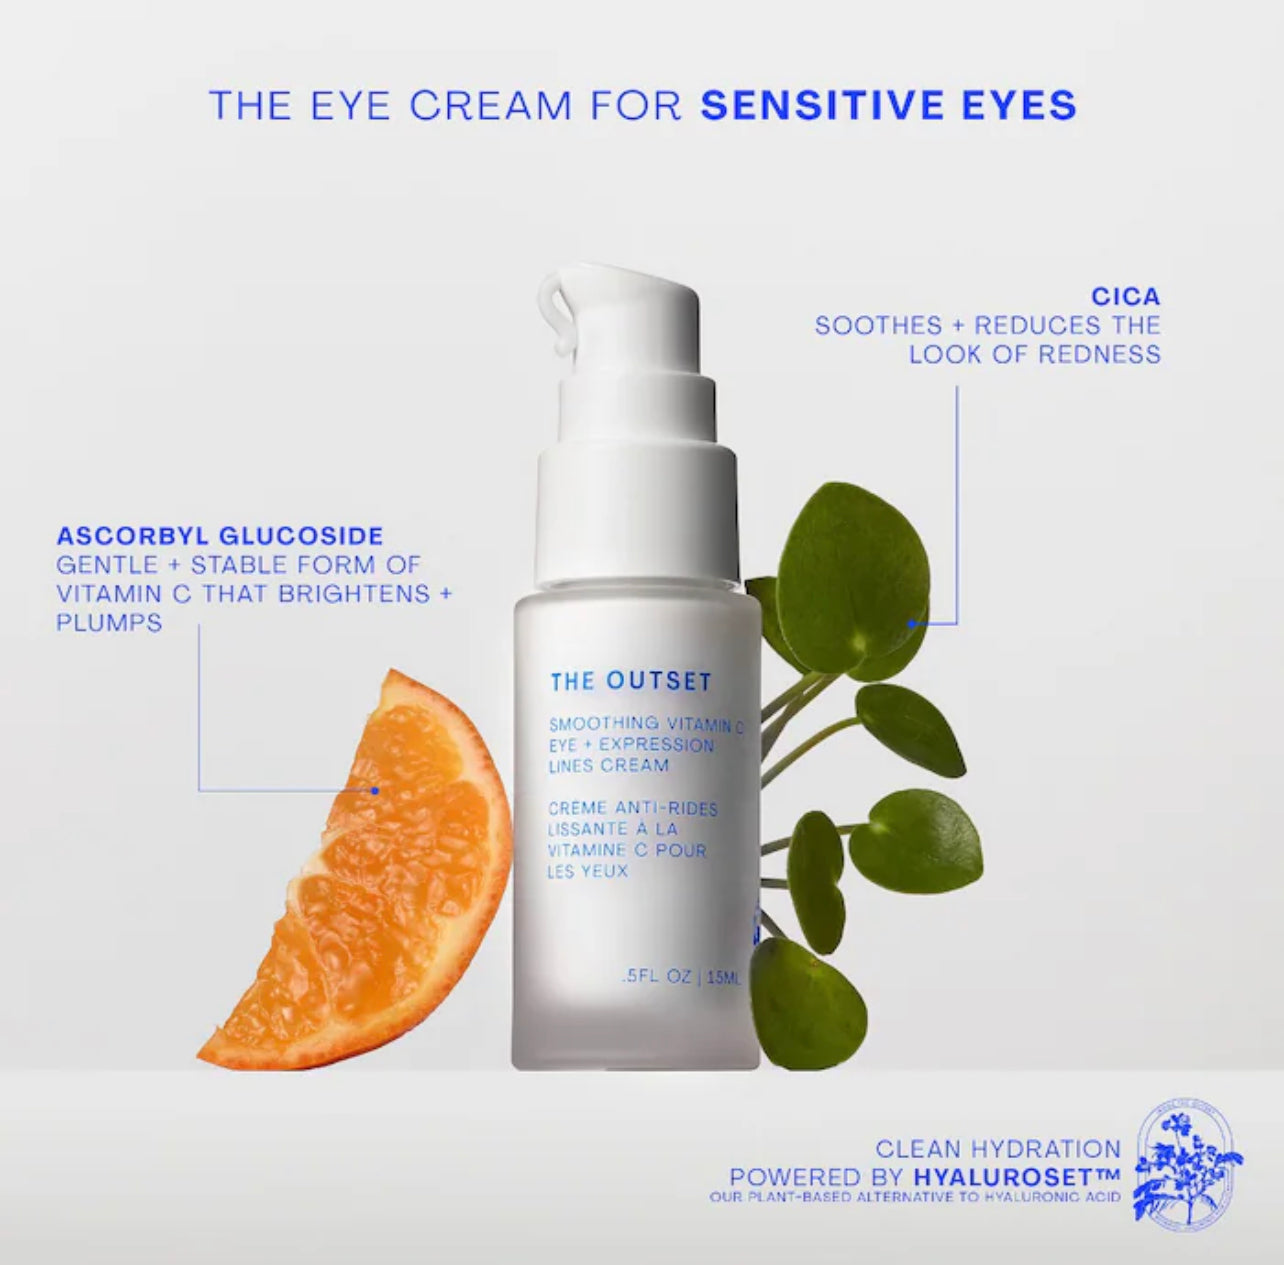 The Outset, Smoothing Vitamin C Eye + Expression Lines Cream